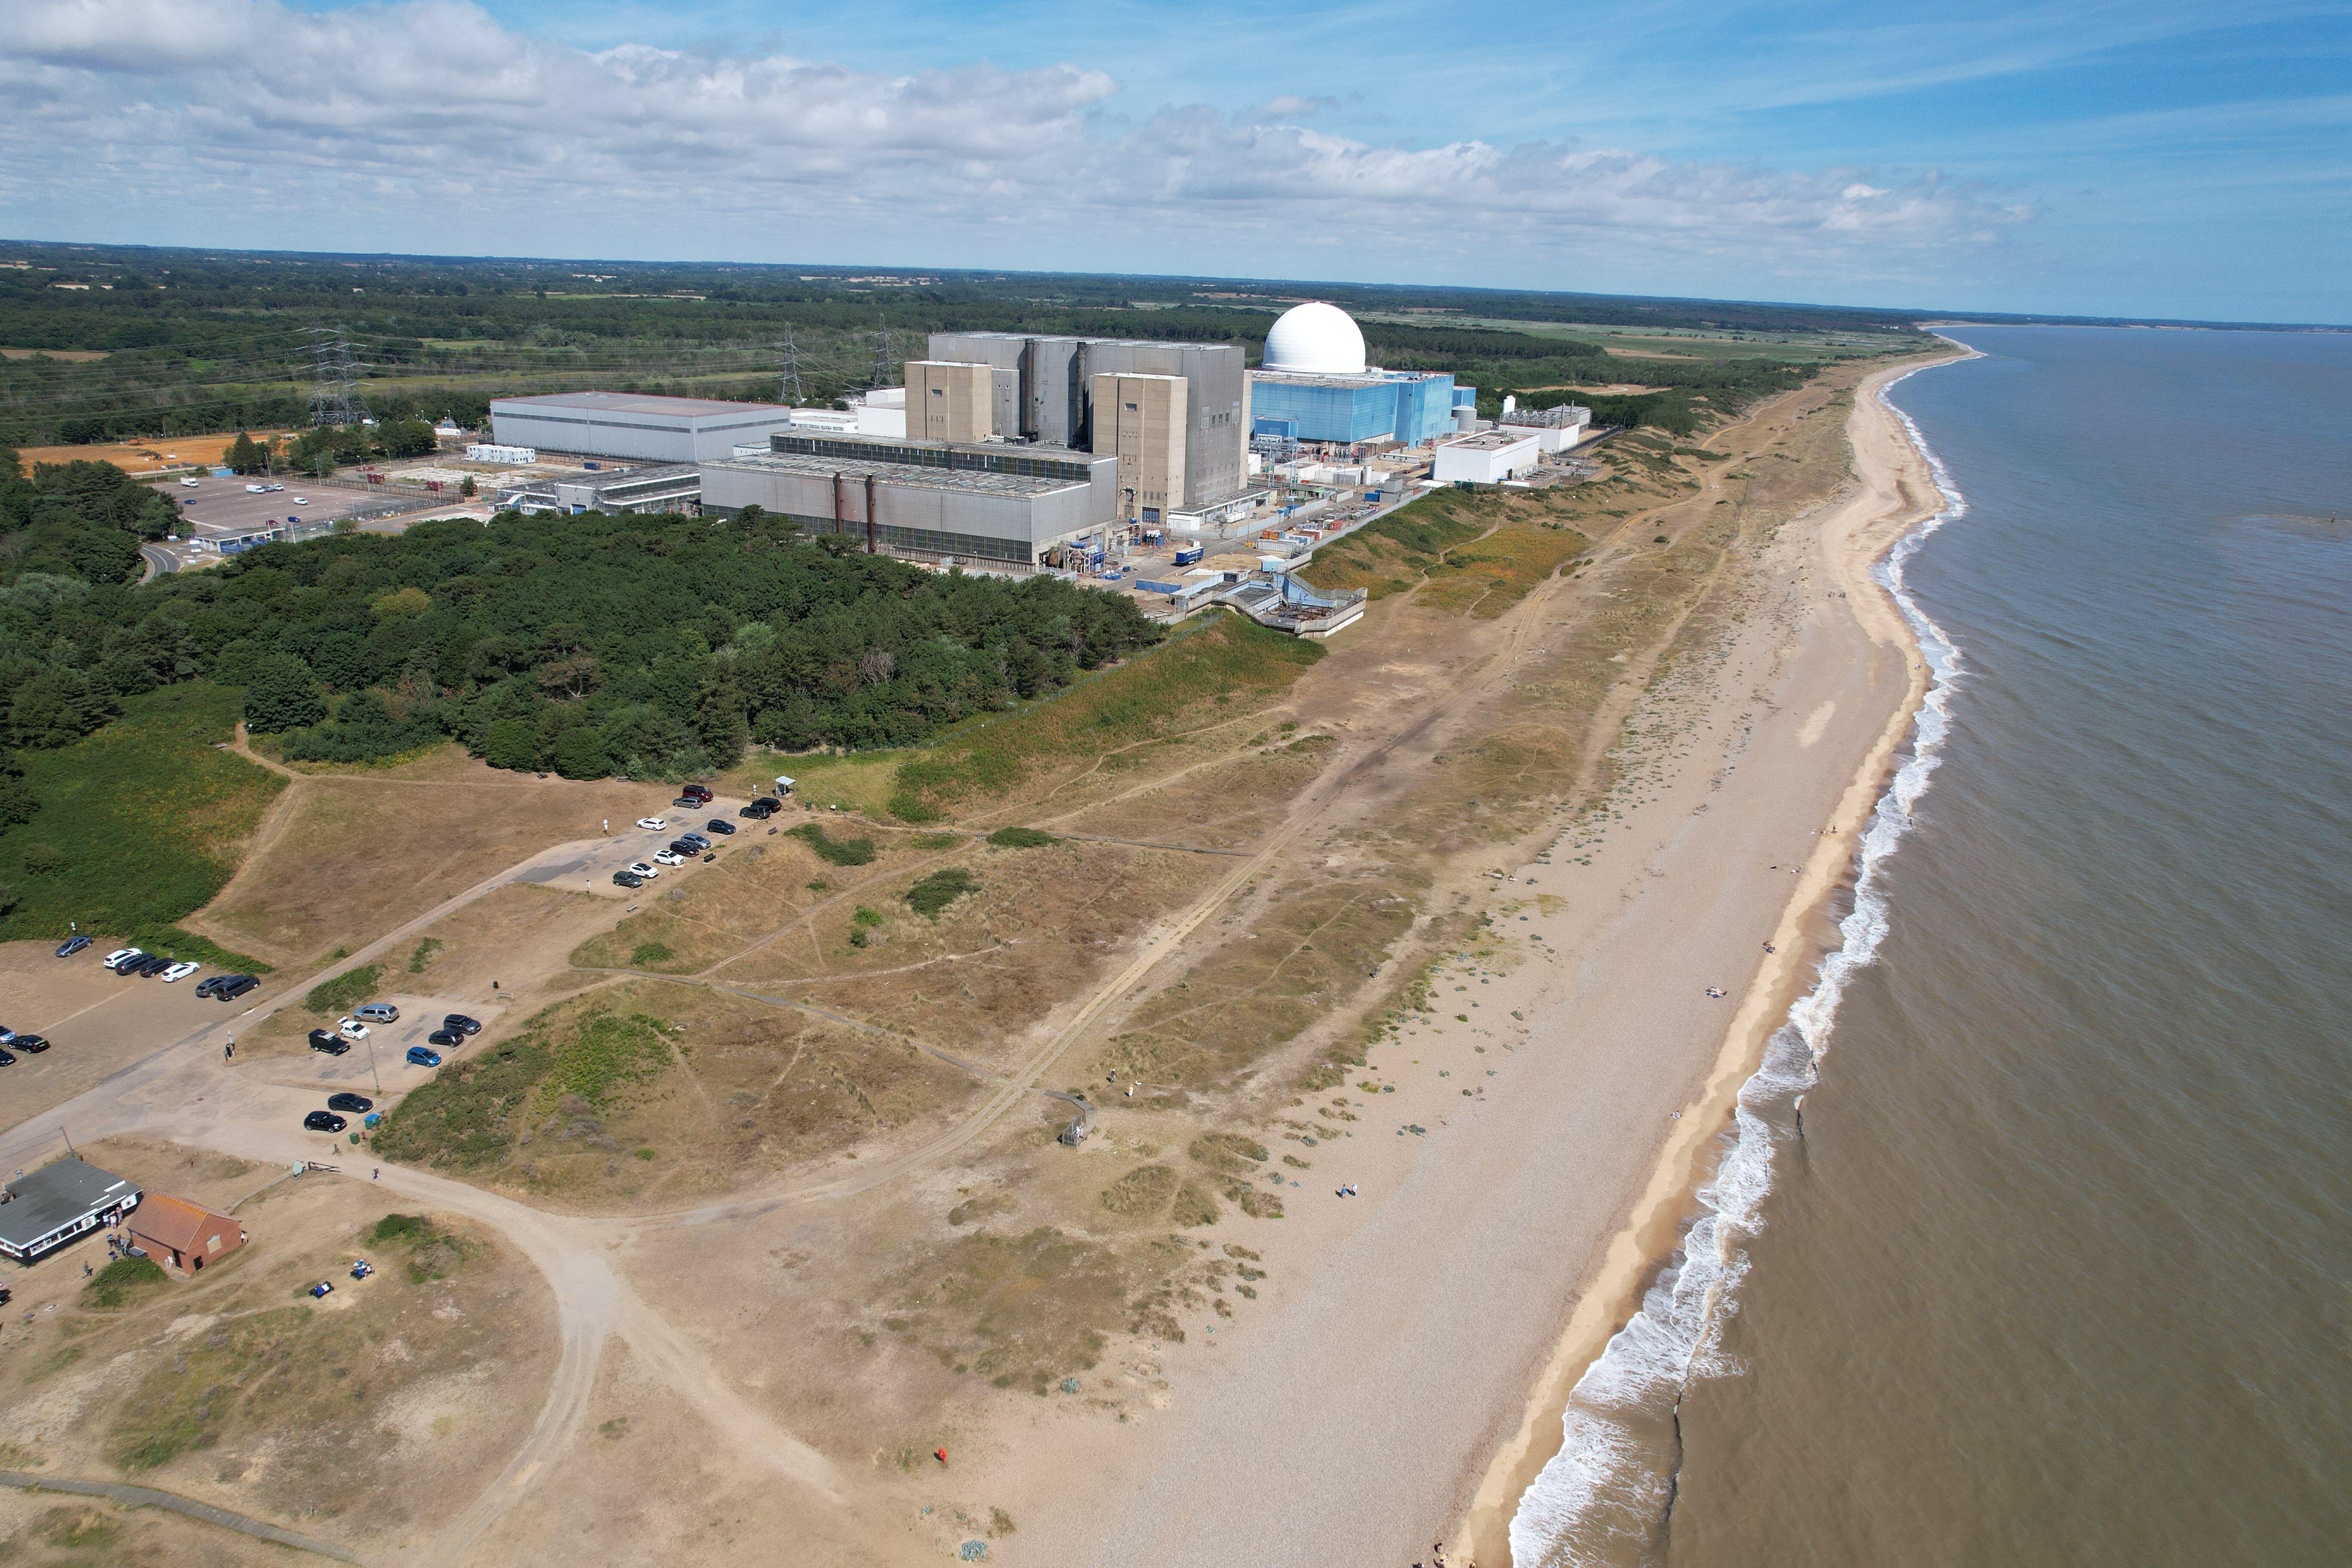 Sizewell nuclear power stations A and B in Suffolk